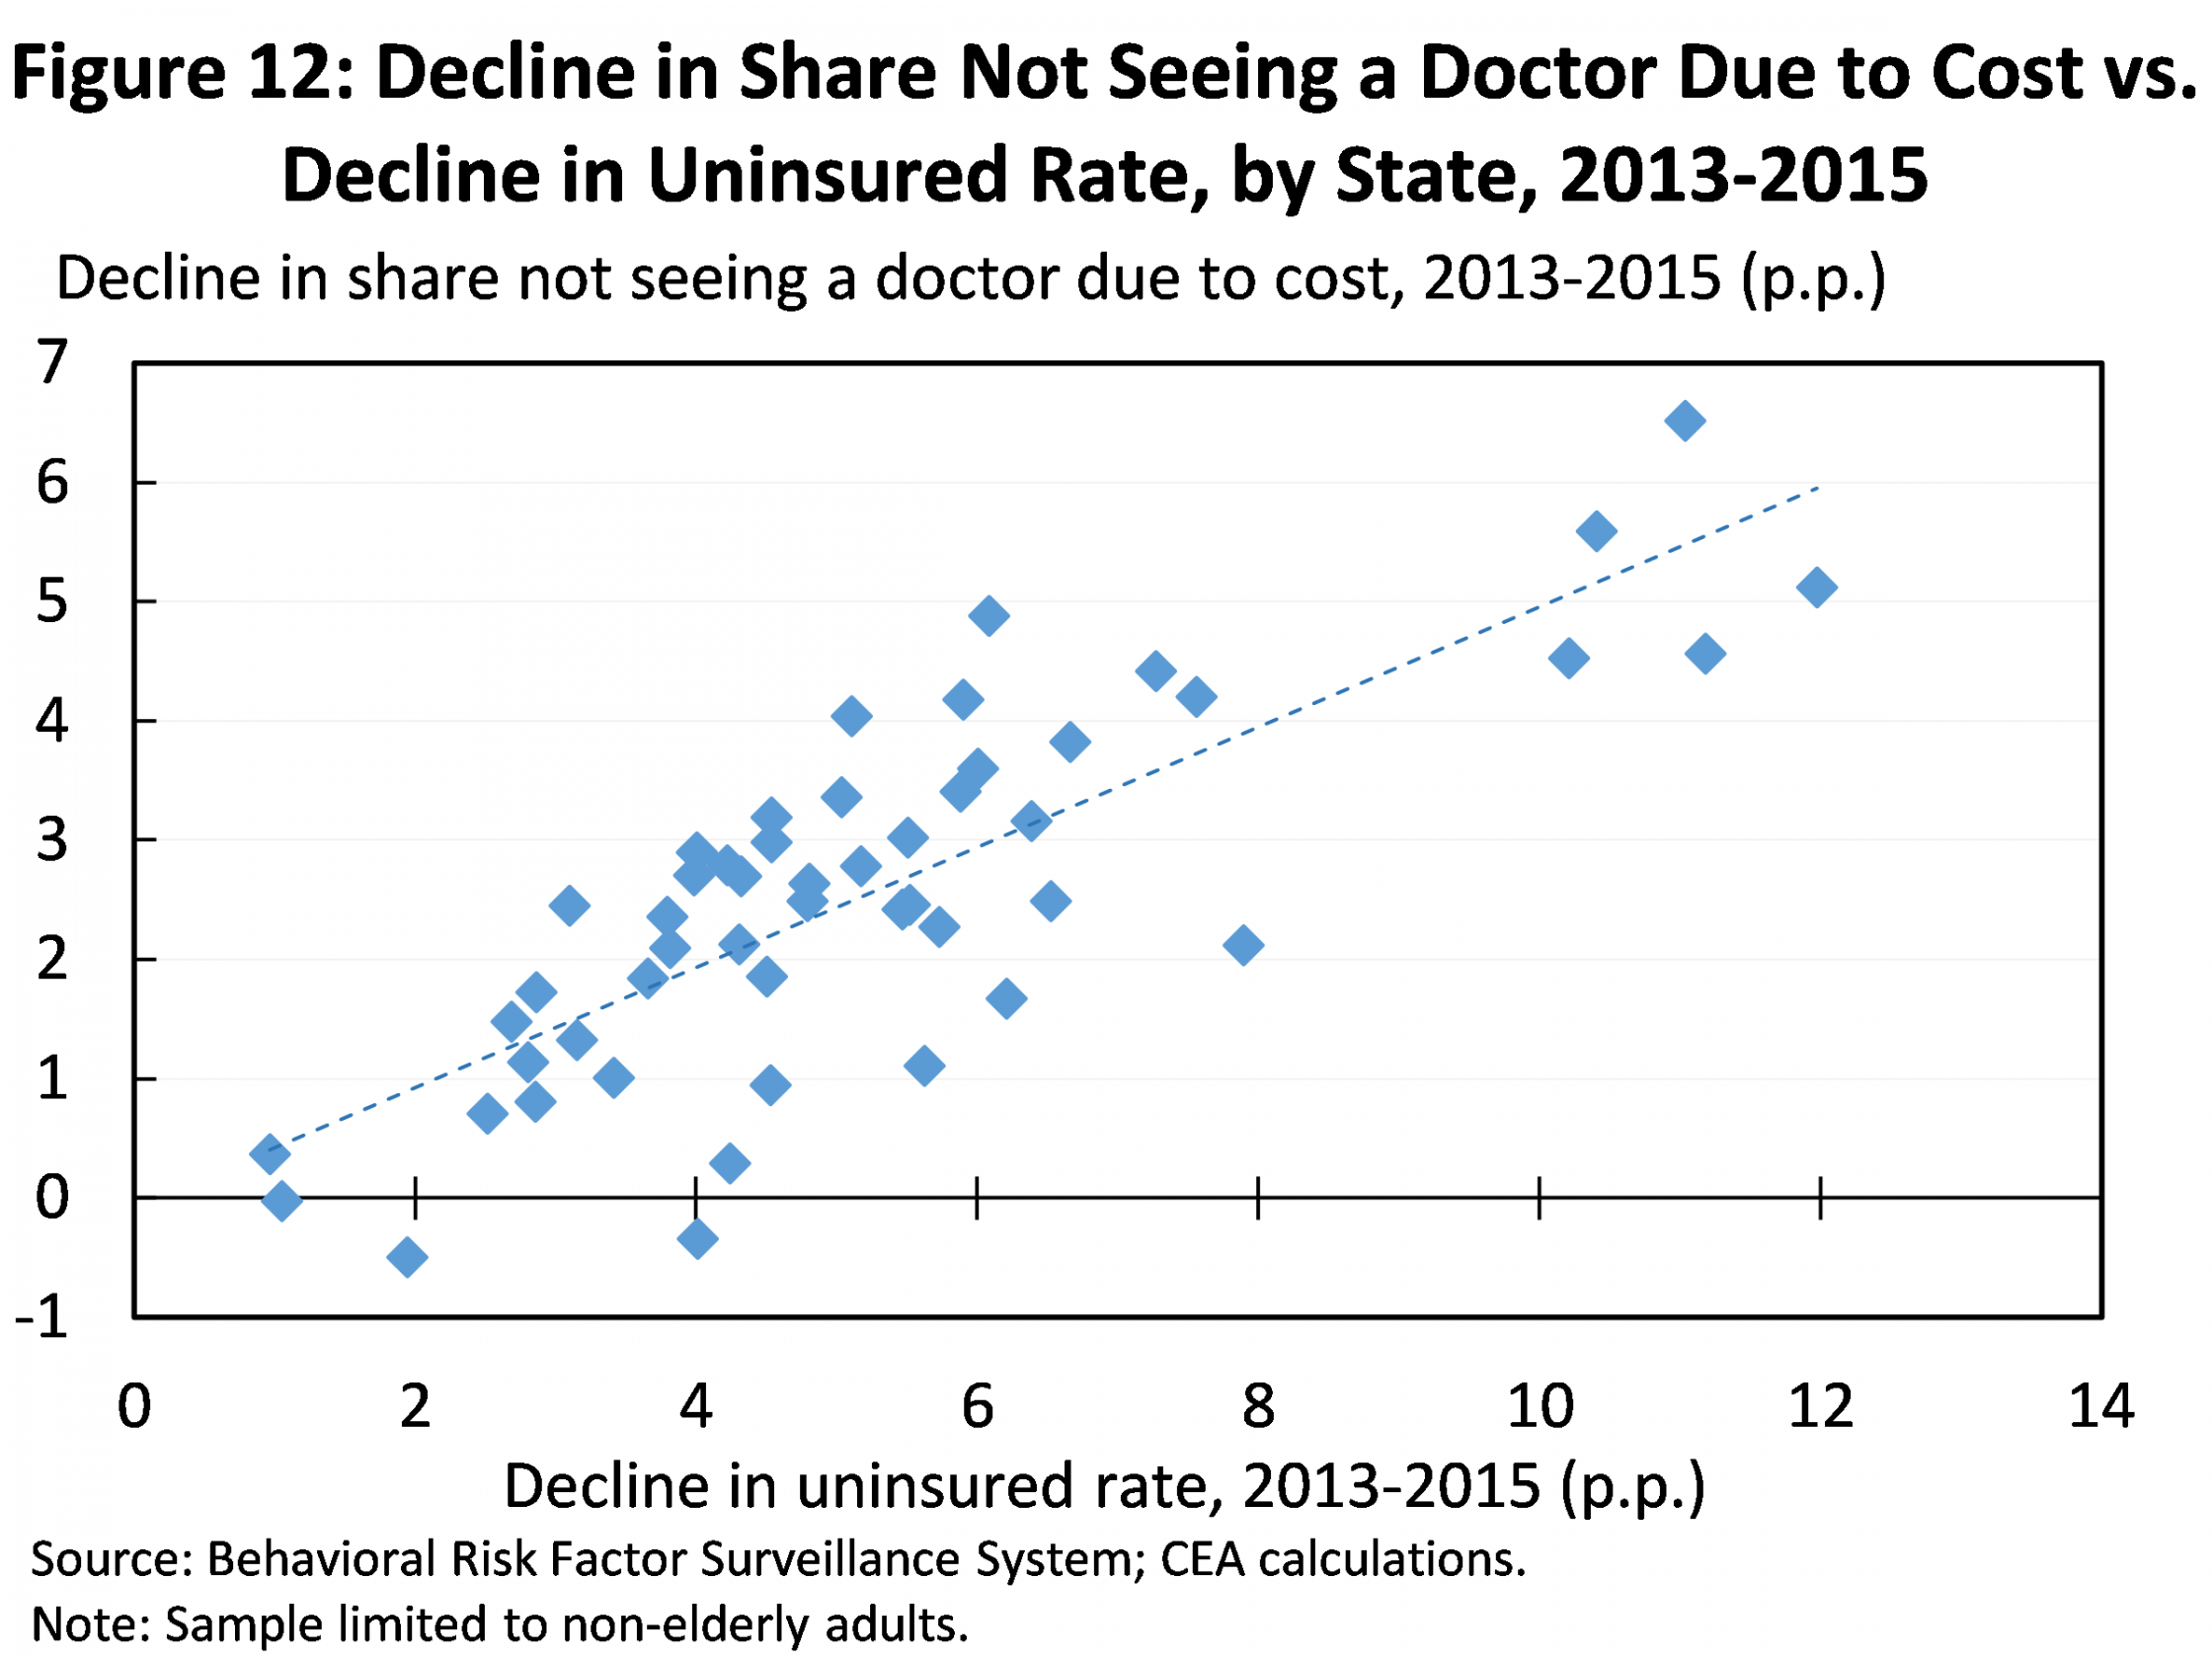 Decline in Share Not Seeing a Doctor Due to Cost vs. Decline in Uninsured Rate, by State, 2013-2015